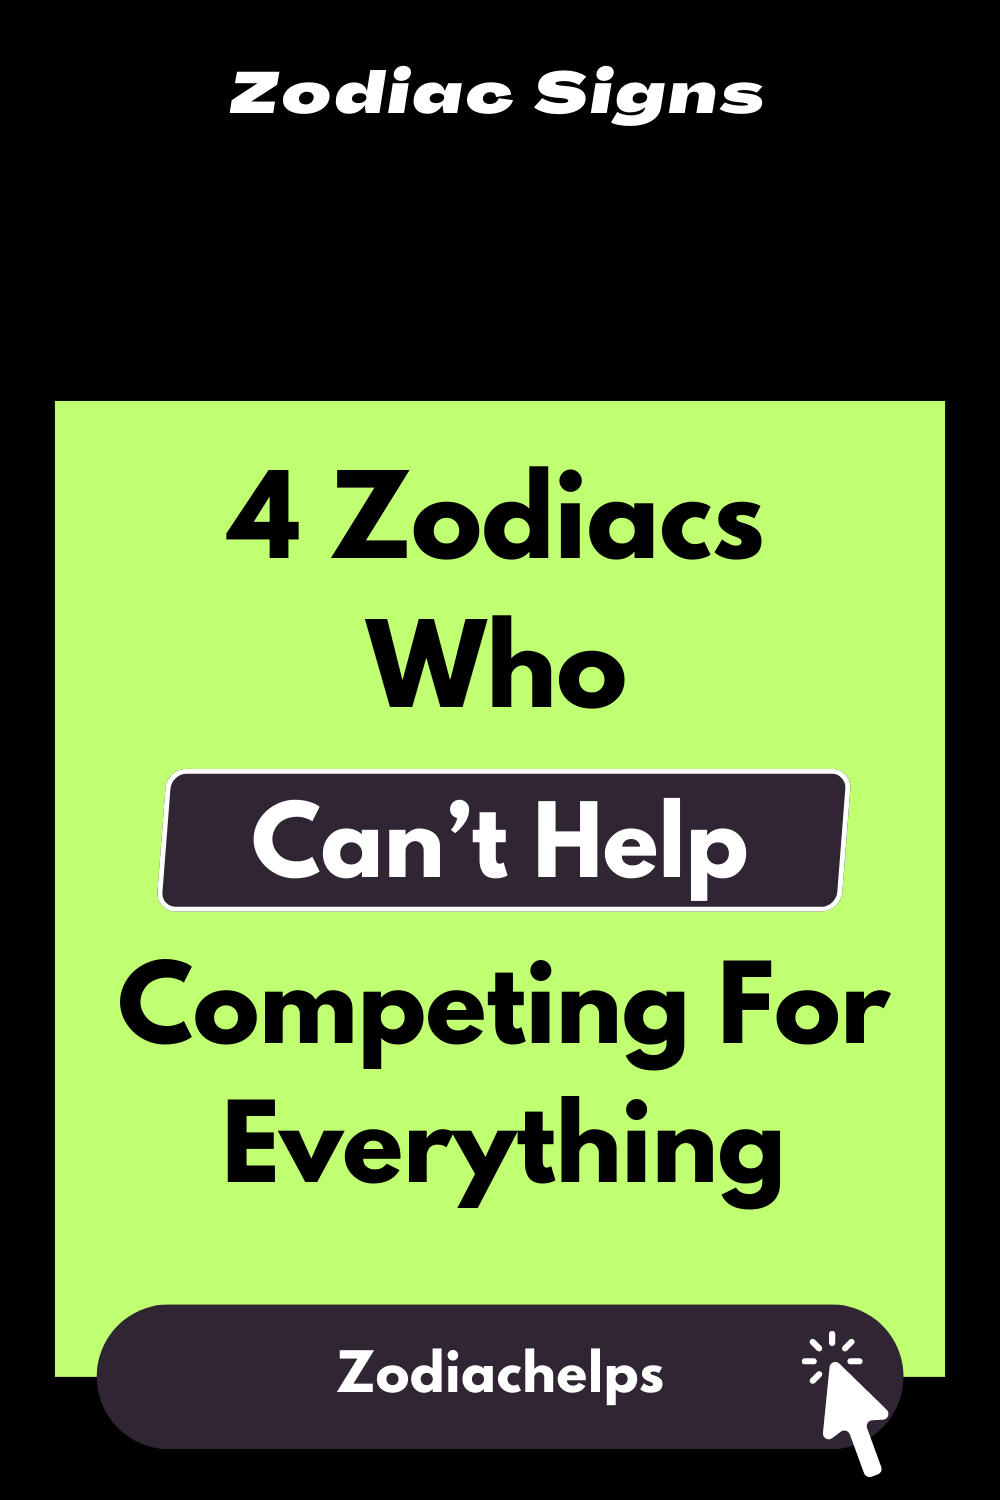 4 Zodiacs Who Can’t Help Competing For Everything